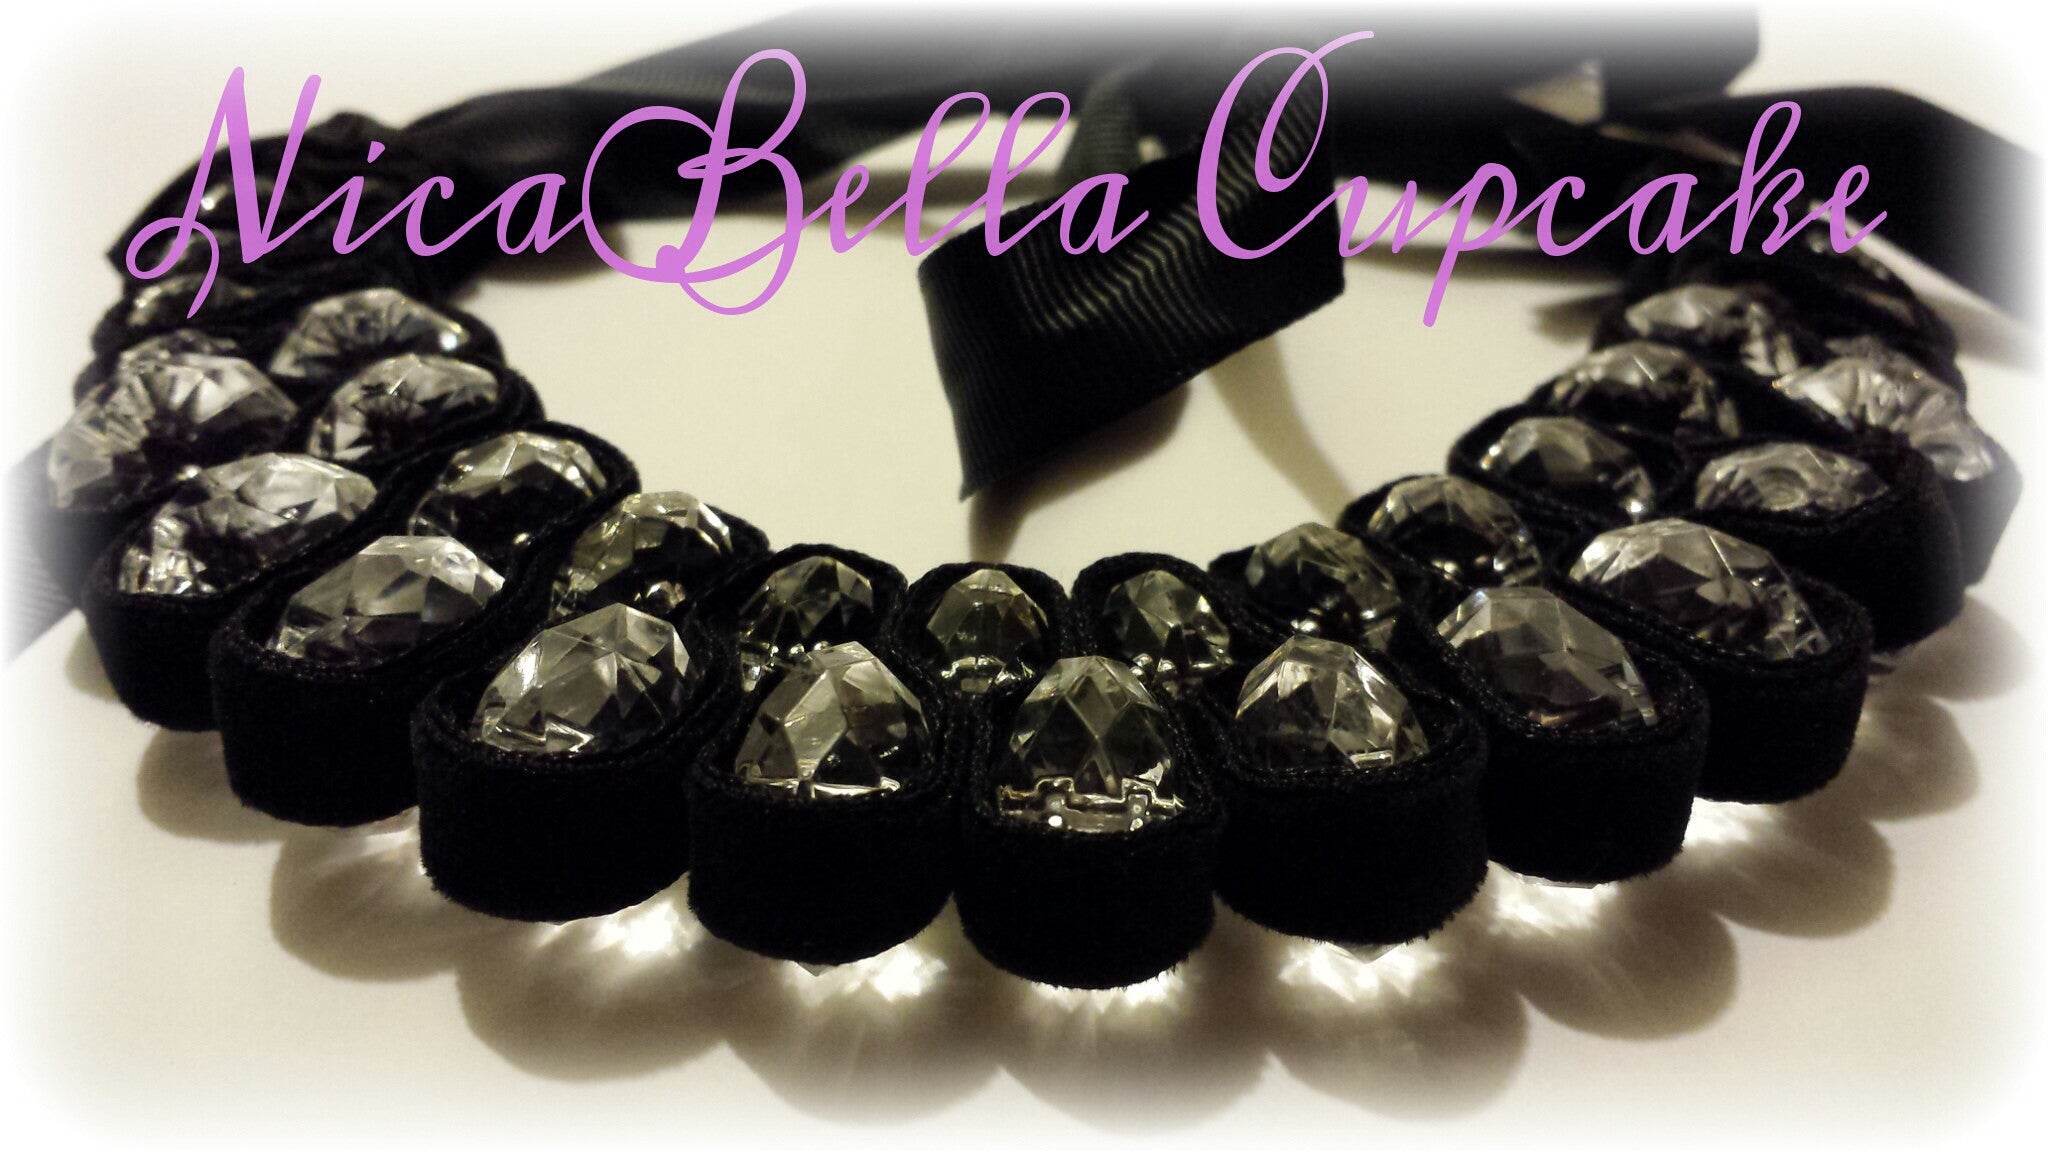 Velvet Ribbon And  Crystal Necklace - NicaBella Cupcake Boutique